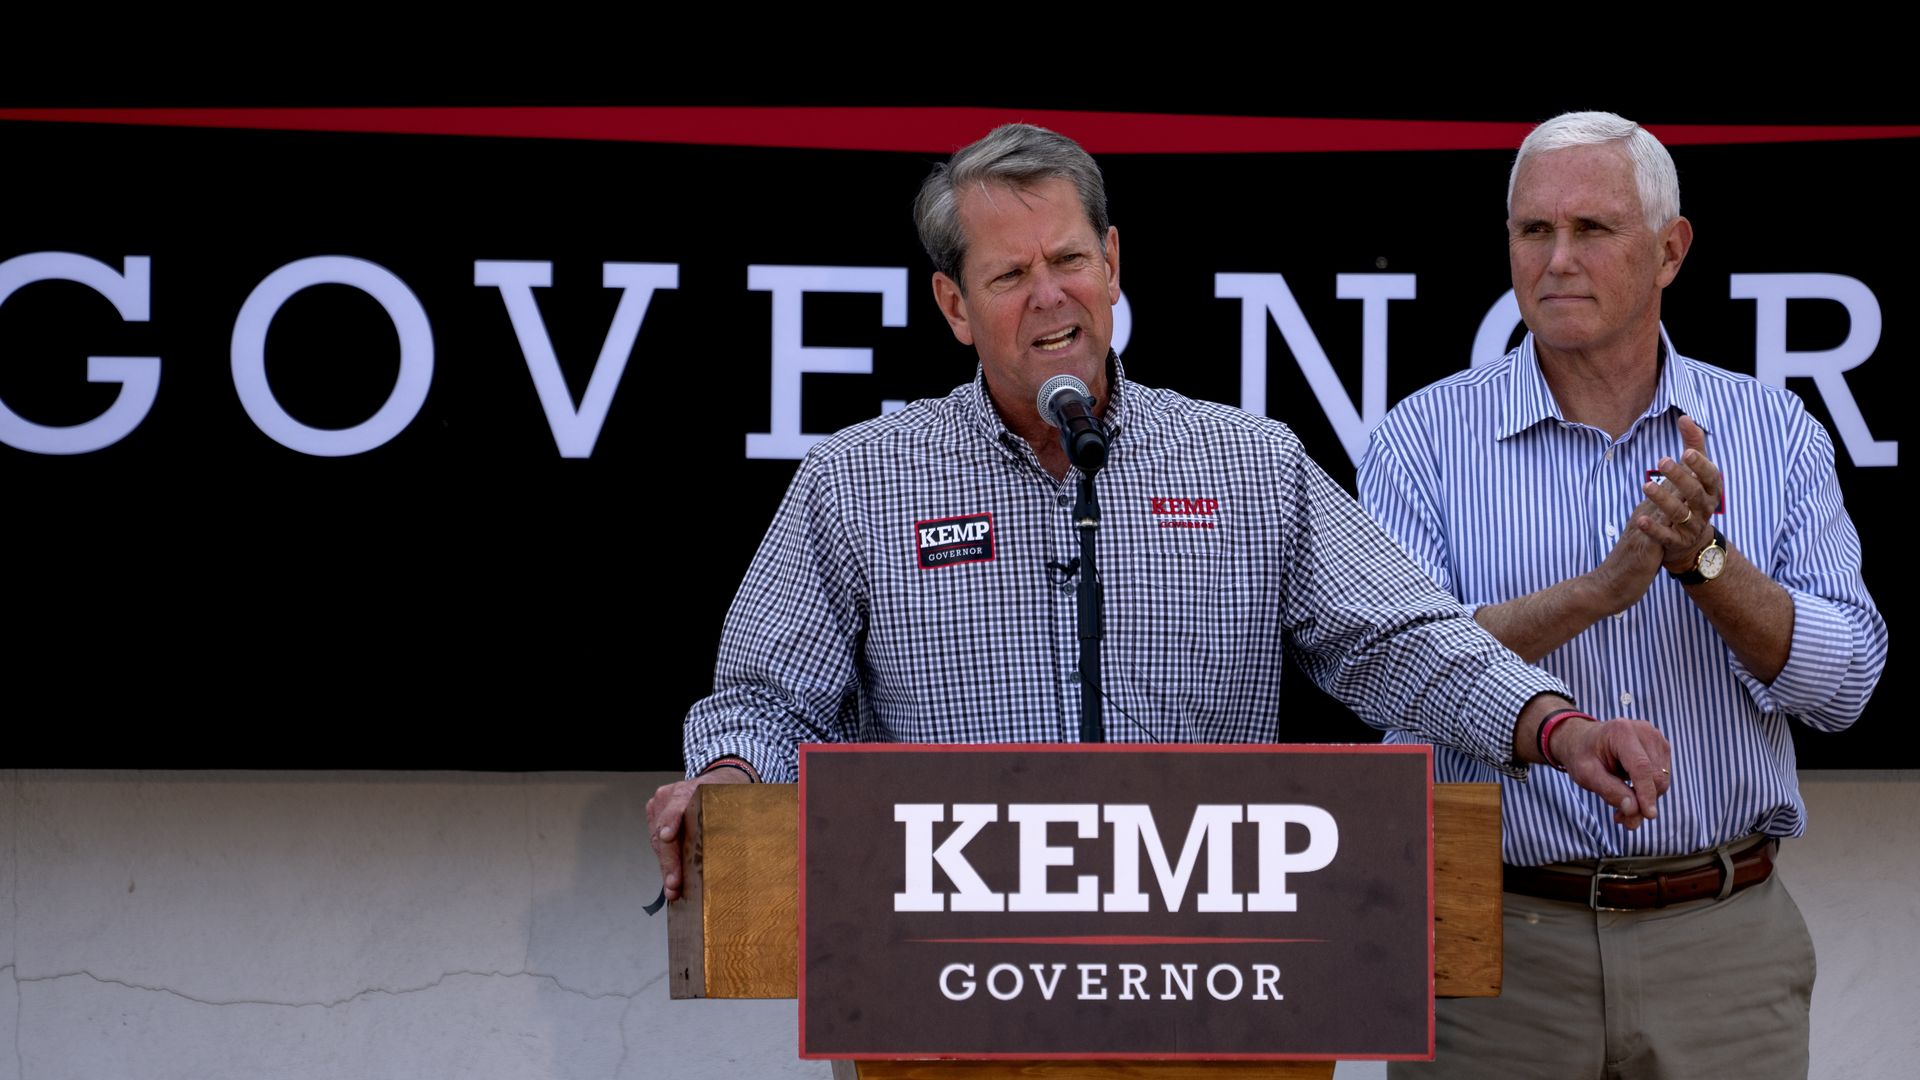 Mike Pence stands behind Brian Kemp and they are both behind a podium that says KEMP Governor.